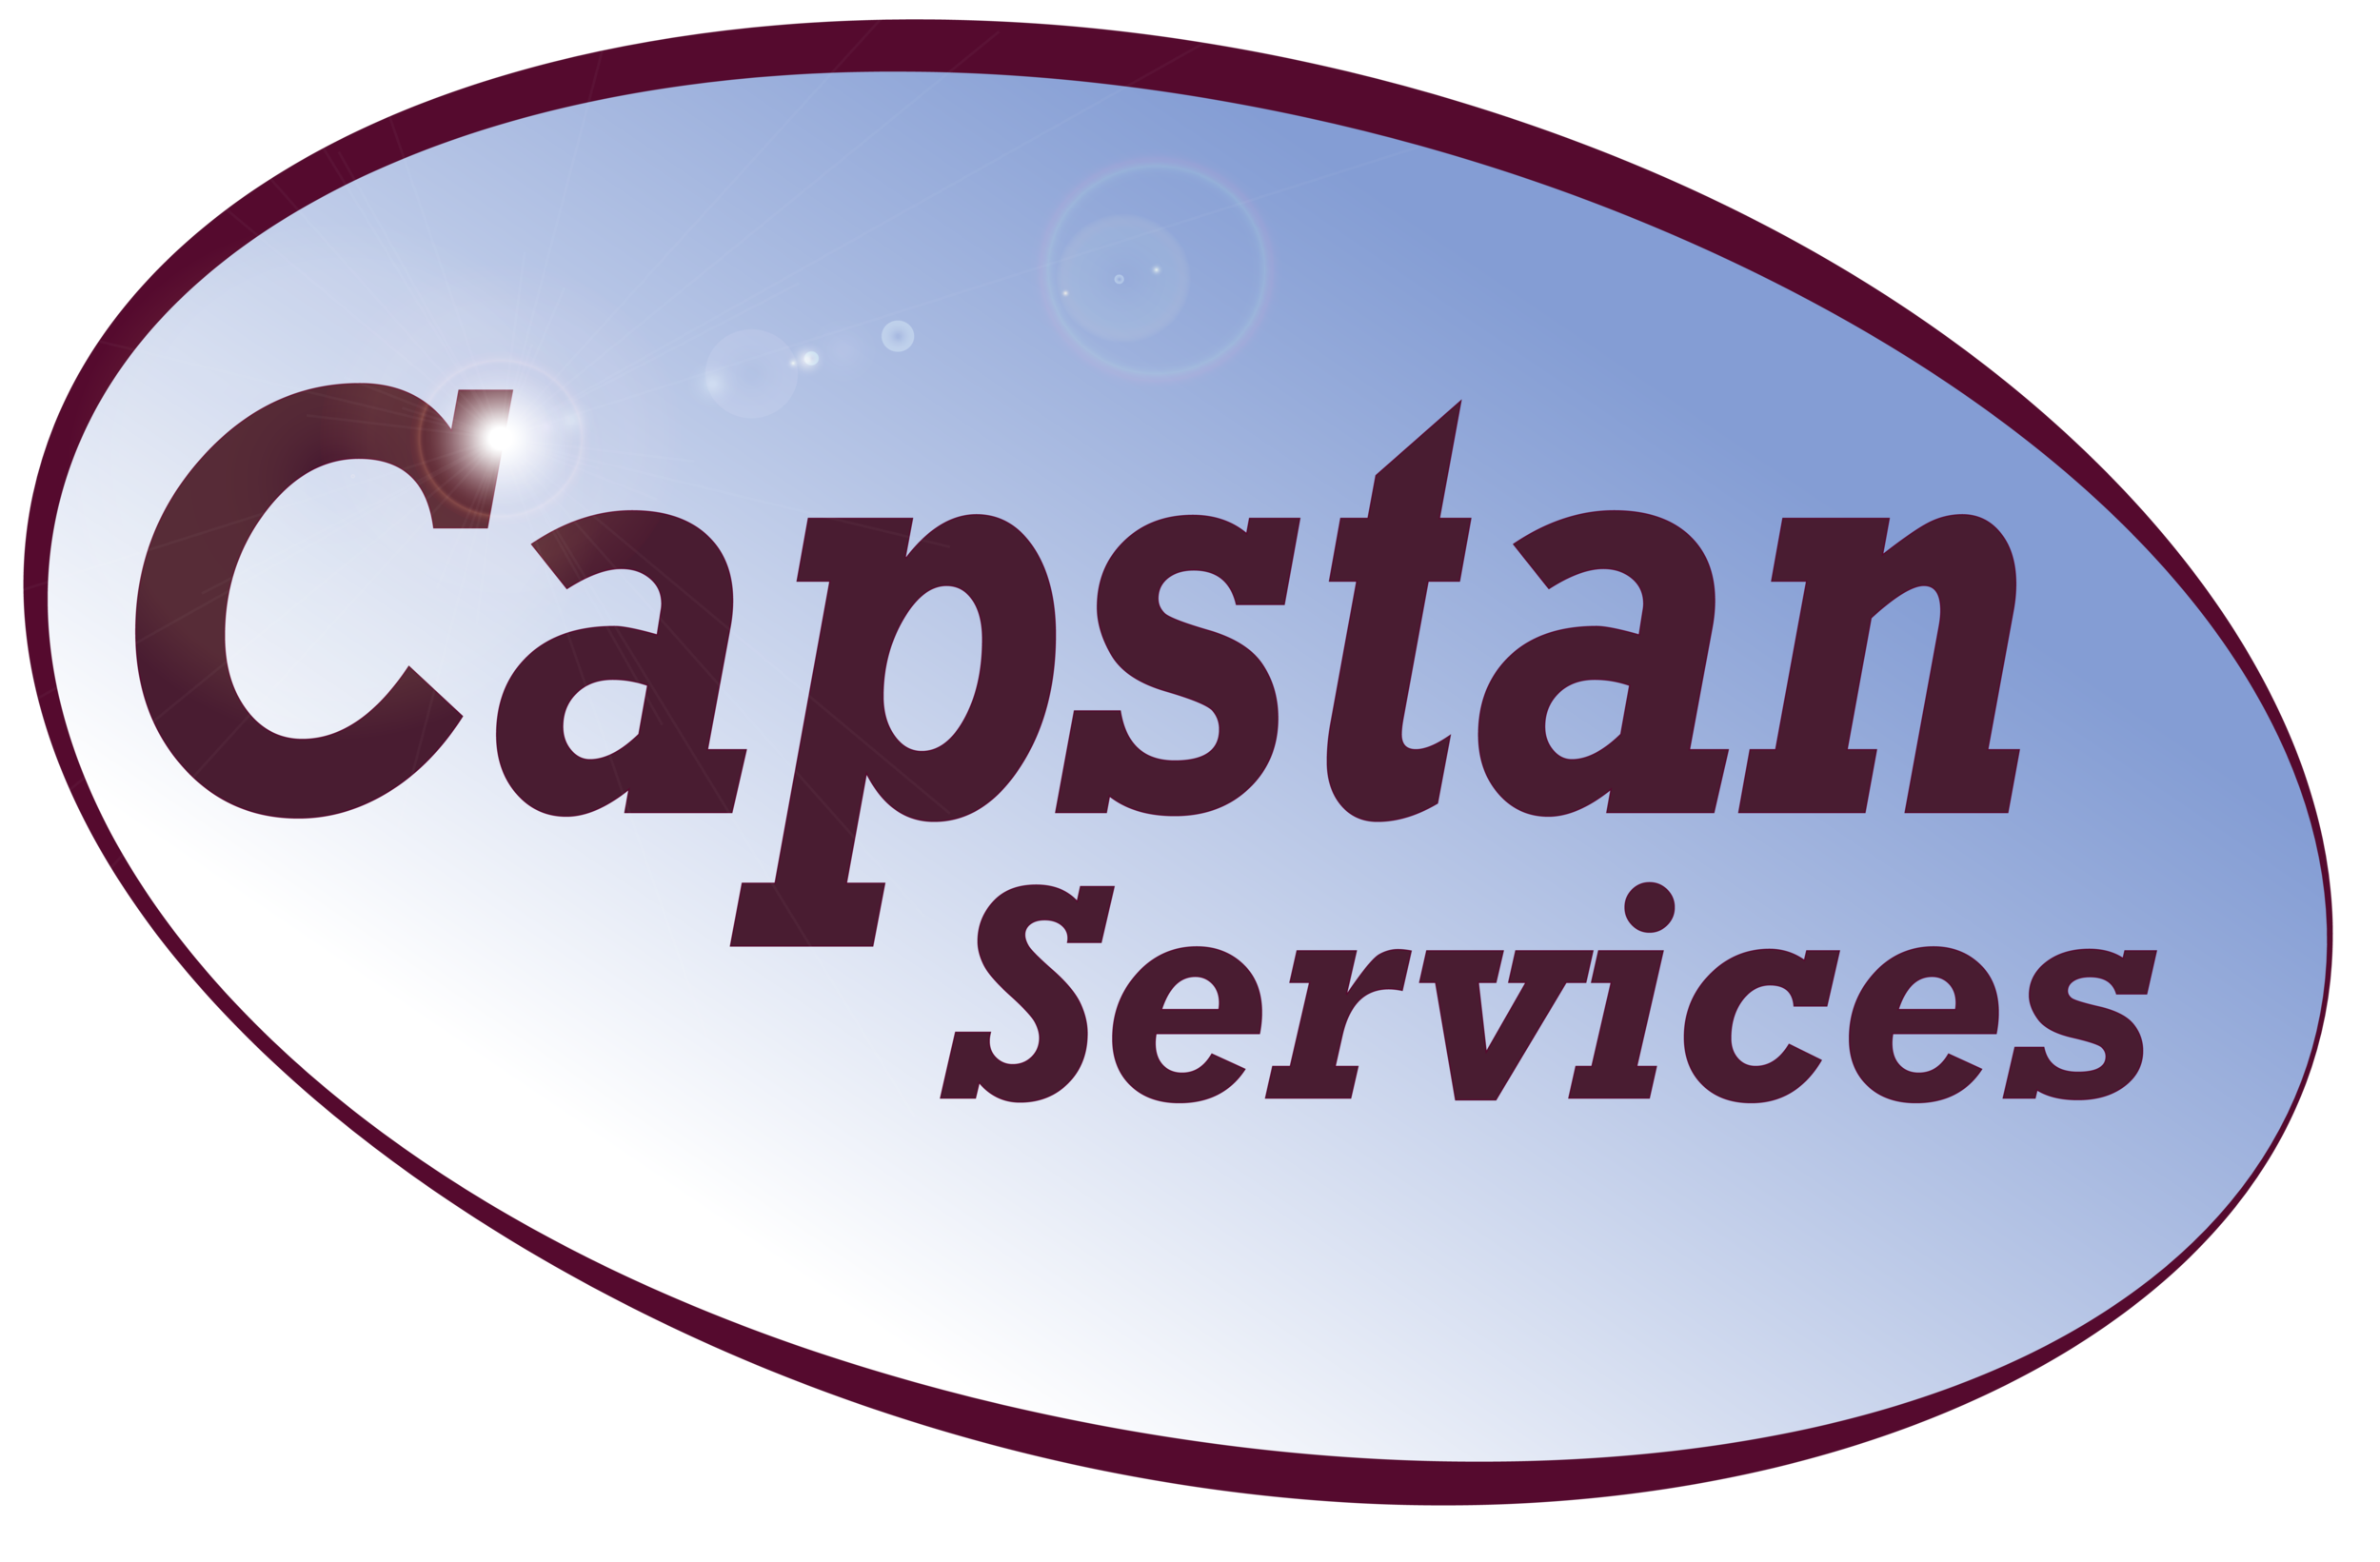 SQL Server Express: Limitations of the free version of SQL Server — Capstan  Services